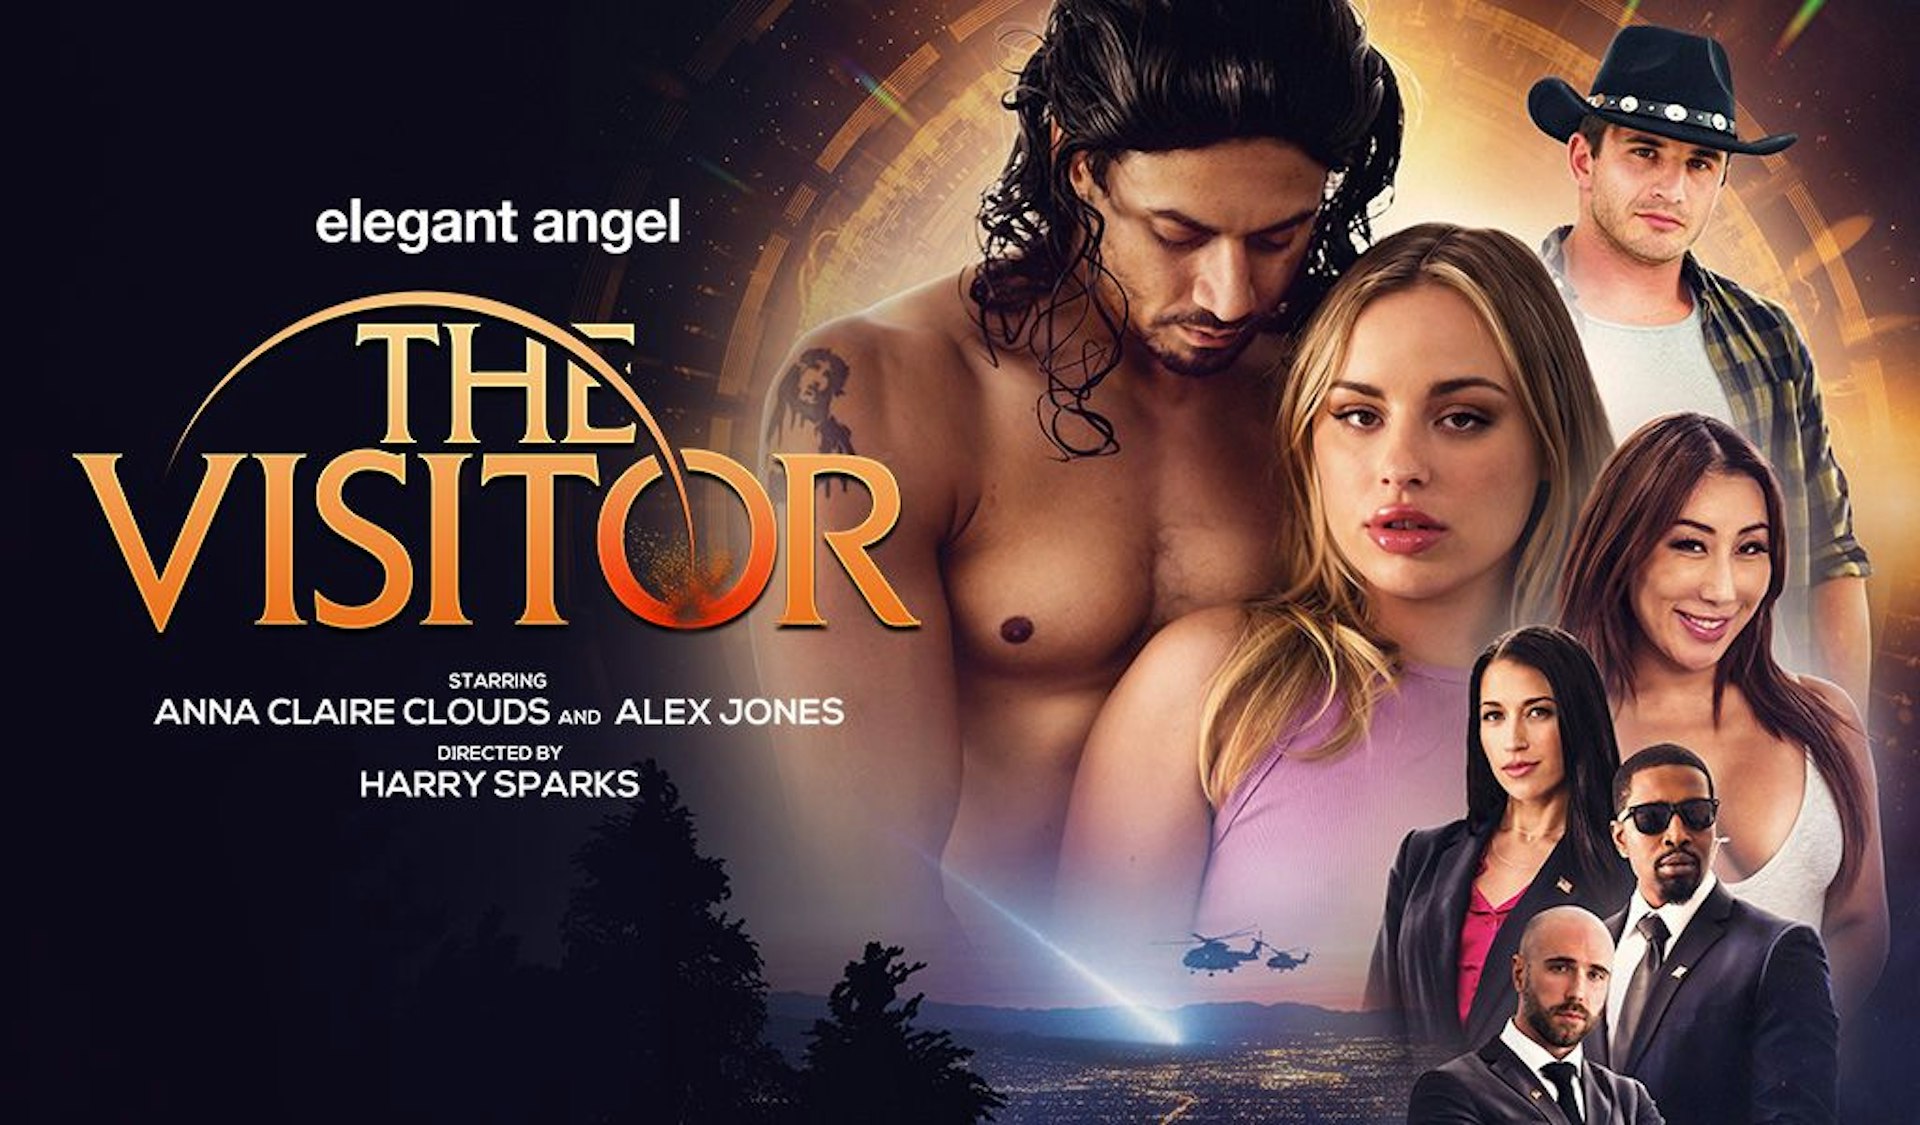 Elegant Angel Drops Episode 1 of “The Visitor” Starring Anna Claire Clouds